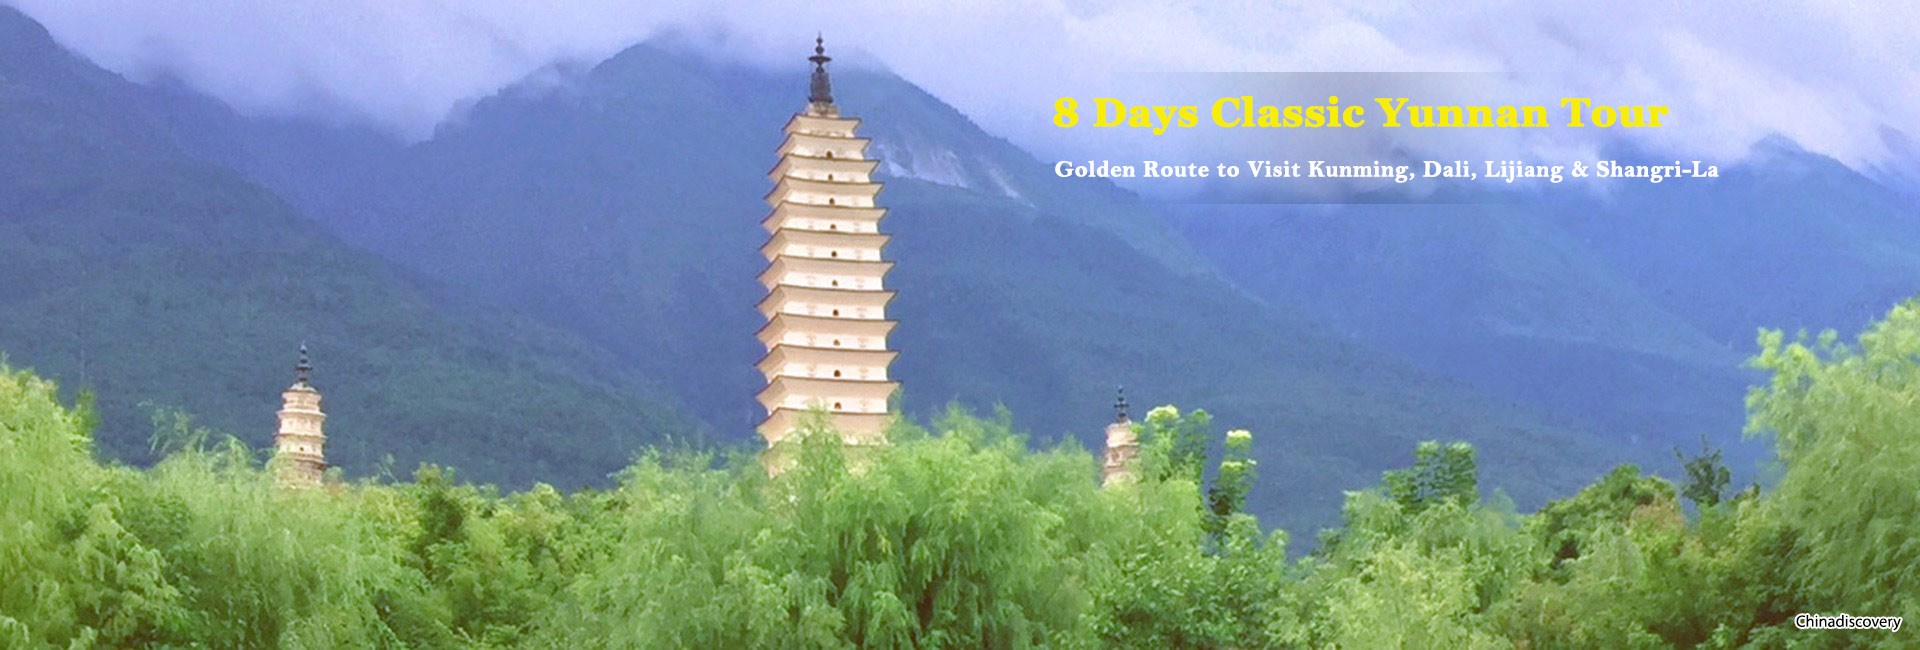 China Yunnan Tours, Yunnan Tour Packages & Travel Services ...